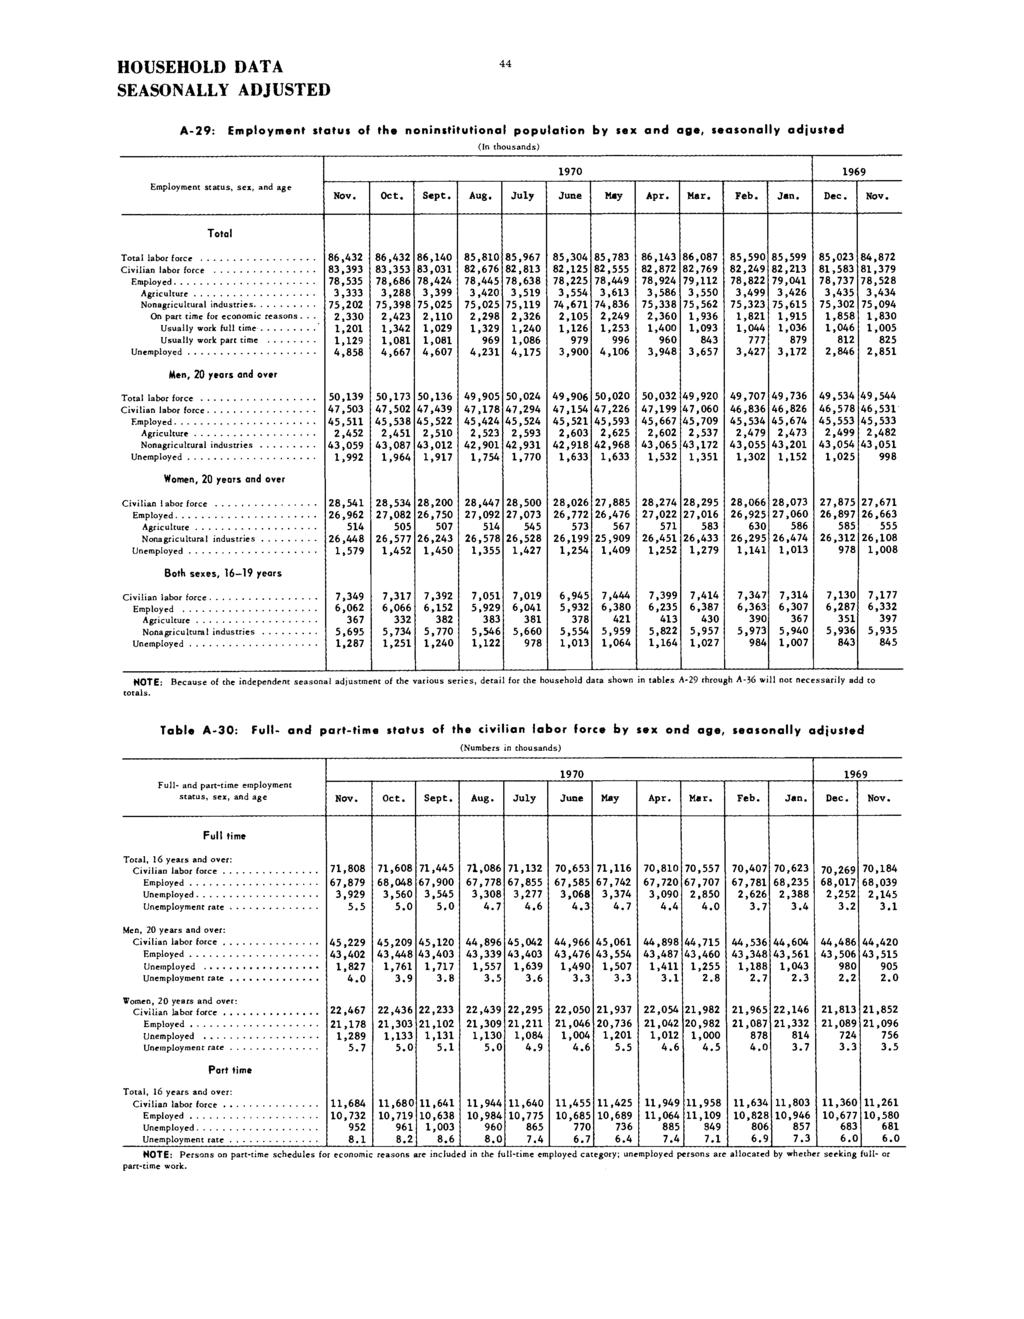 A-29: Employment status of the noninstitutional population by sex and age, seasonally adjusted (In thousands) Employment status, sex, and age Sept. Aug. July June May Apr. Mar. Feb. Jan. Dec.